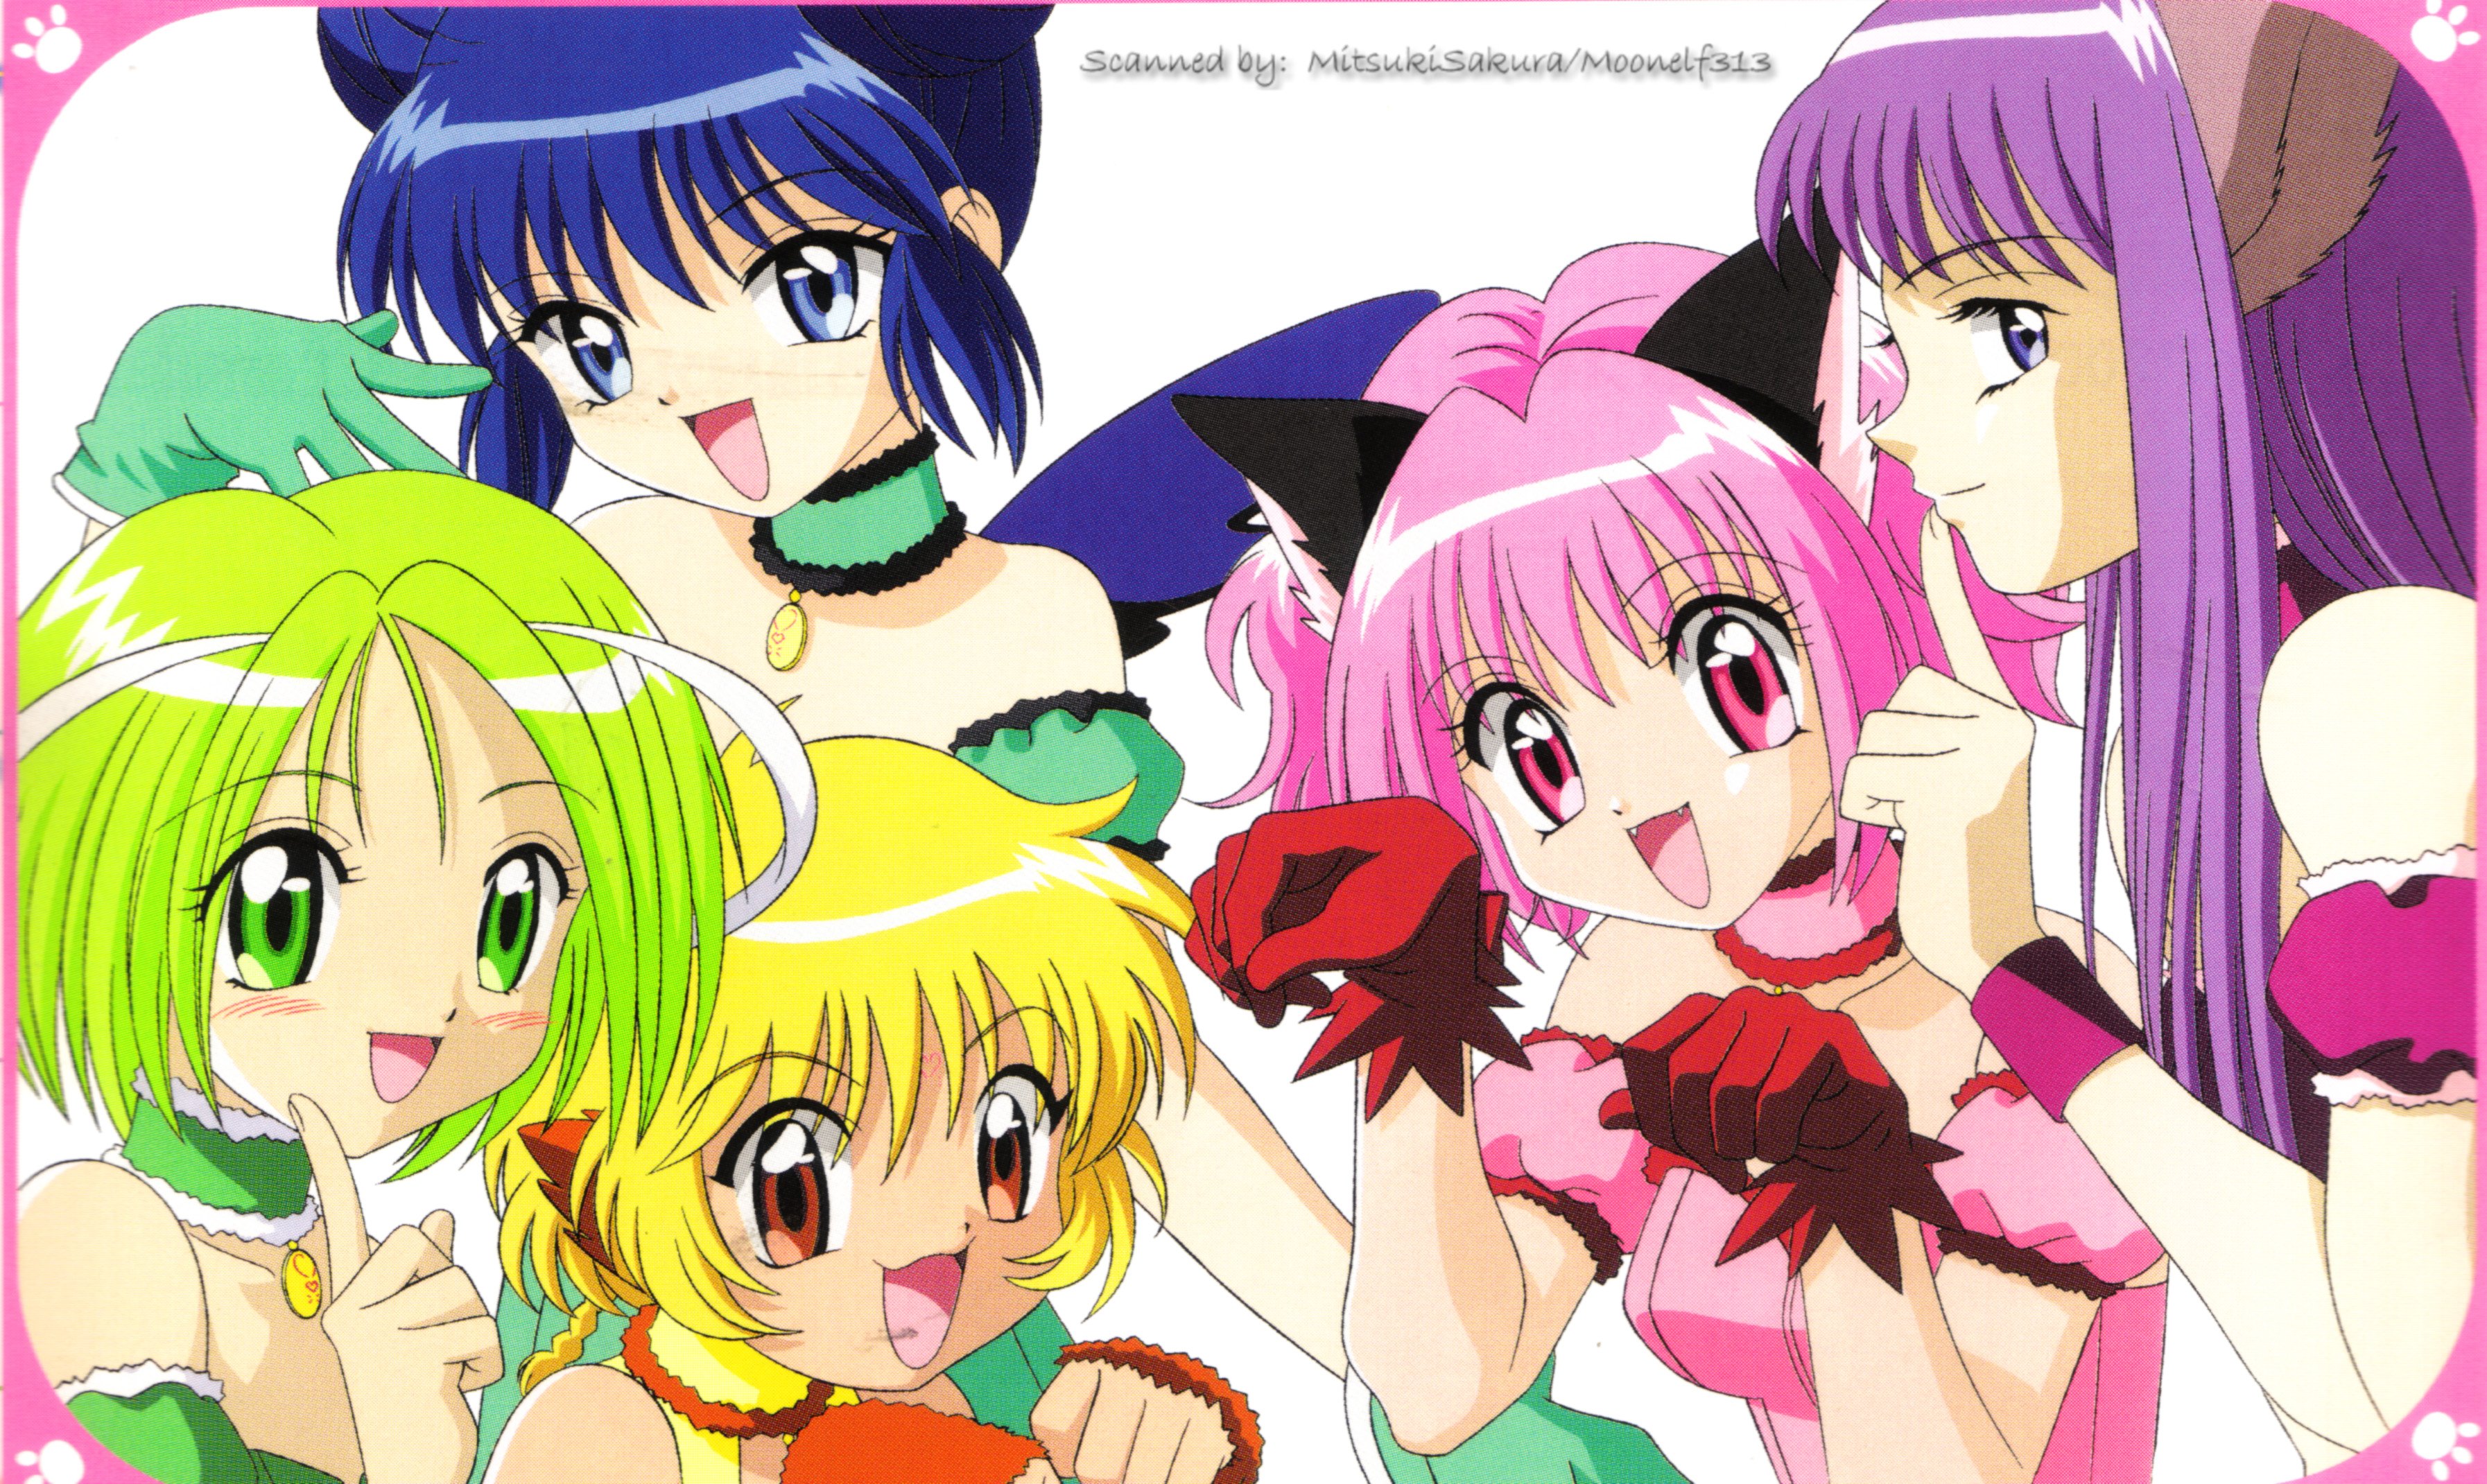 tokyo, Mew, Mew, Meow, Meow, Power Wallpapers HD / Desktop and Mobile Backg...